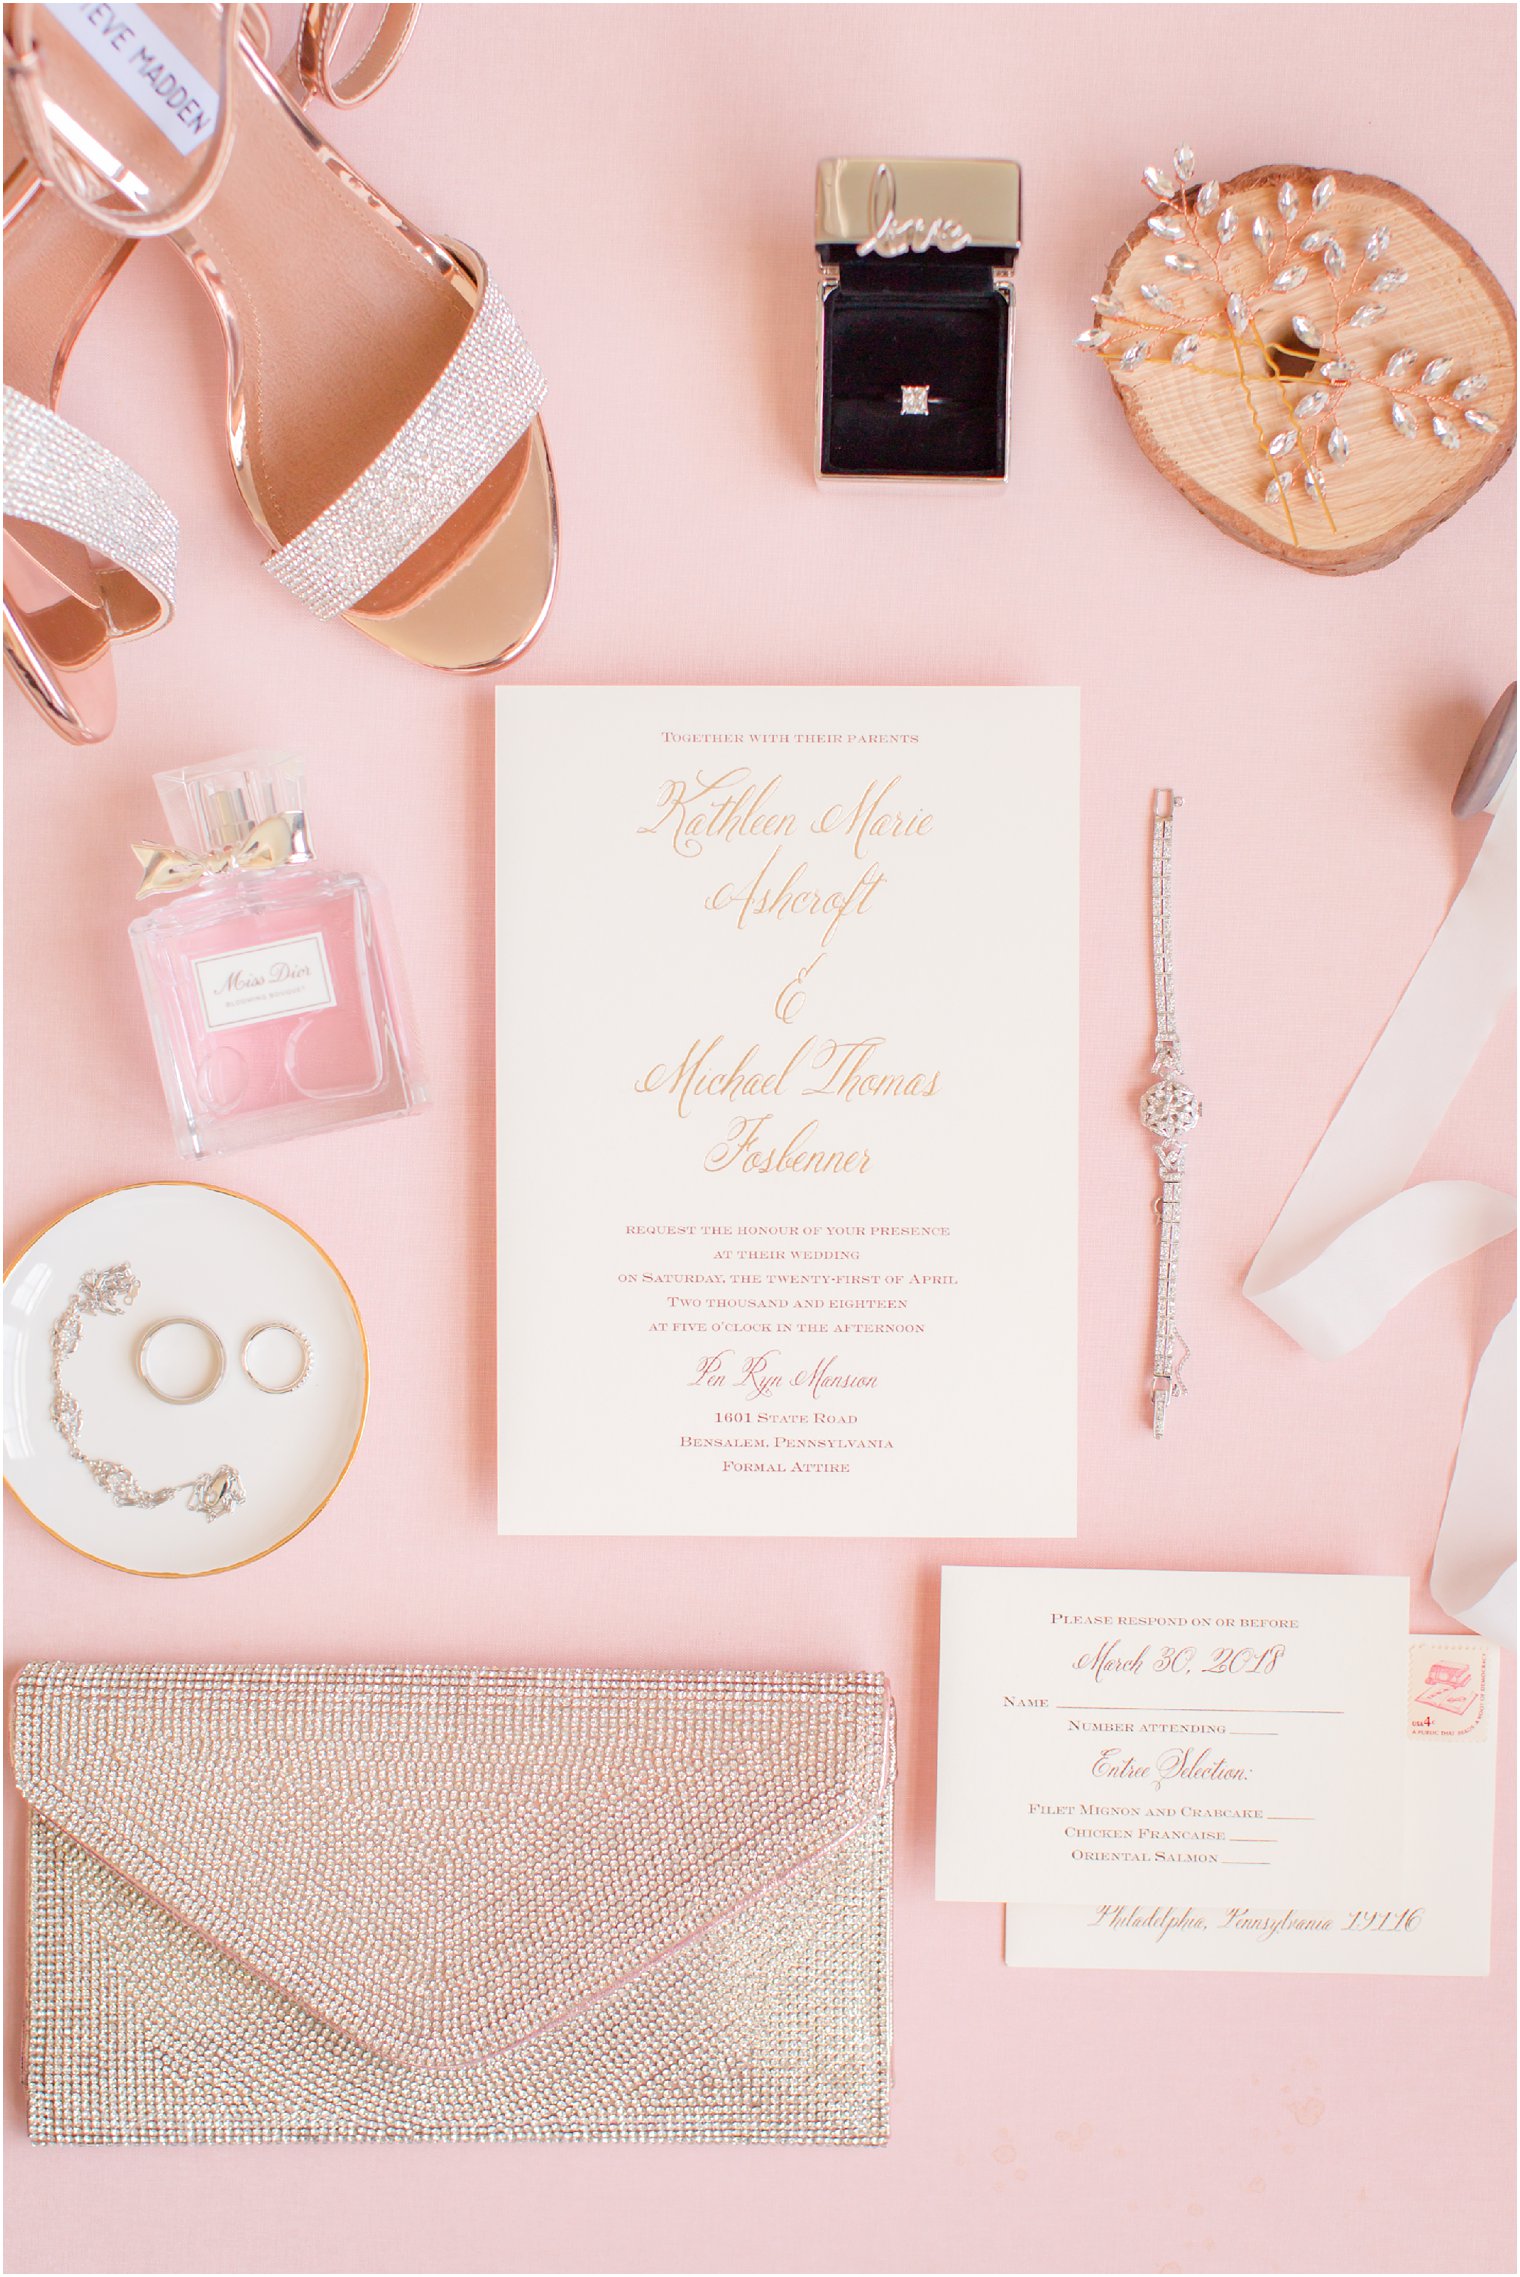 photo of invitation and bridal details